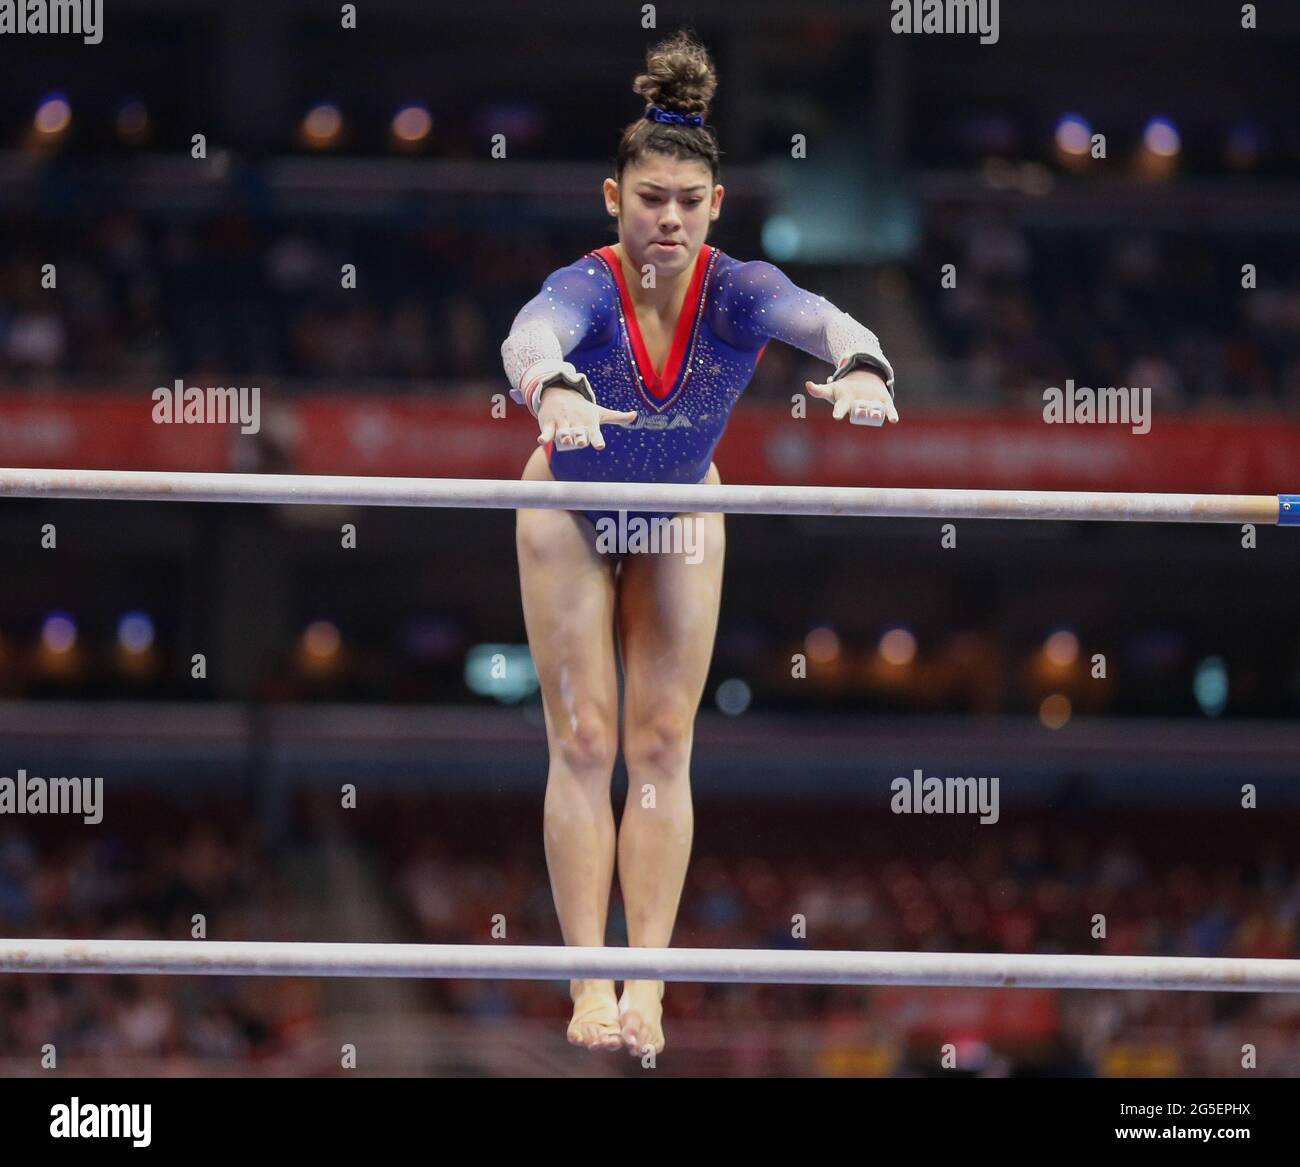 June 25, 2021: Kayla DiCello executes a release move on the bars during Day 1 of the 2021 U.S. Women's Gymnastics Olympic Team Trials at the Dome at America's Center in St. Louis, MO. Kyle Okita/CSM Stock Photo